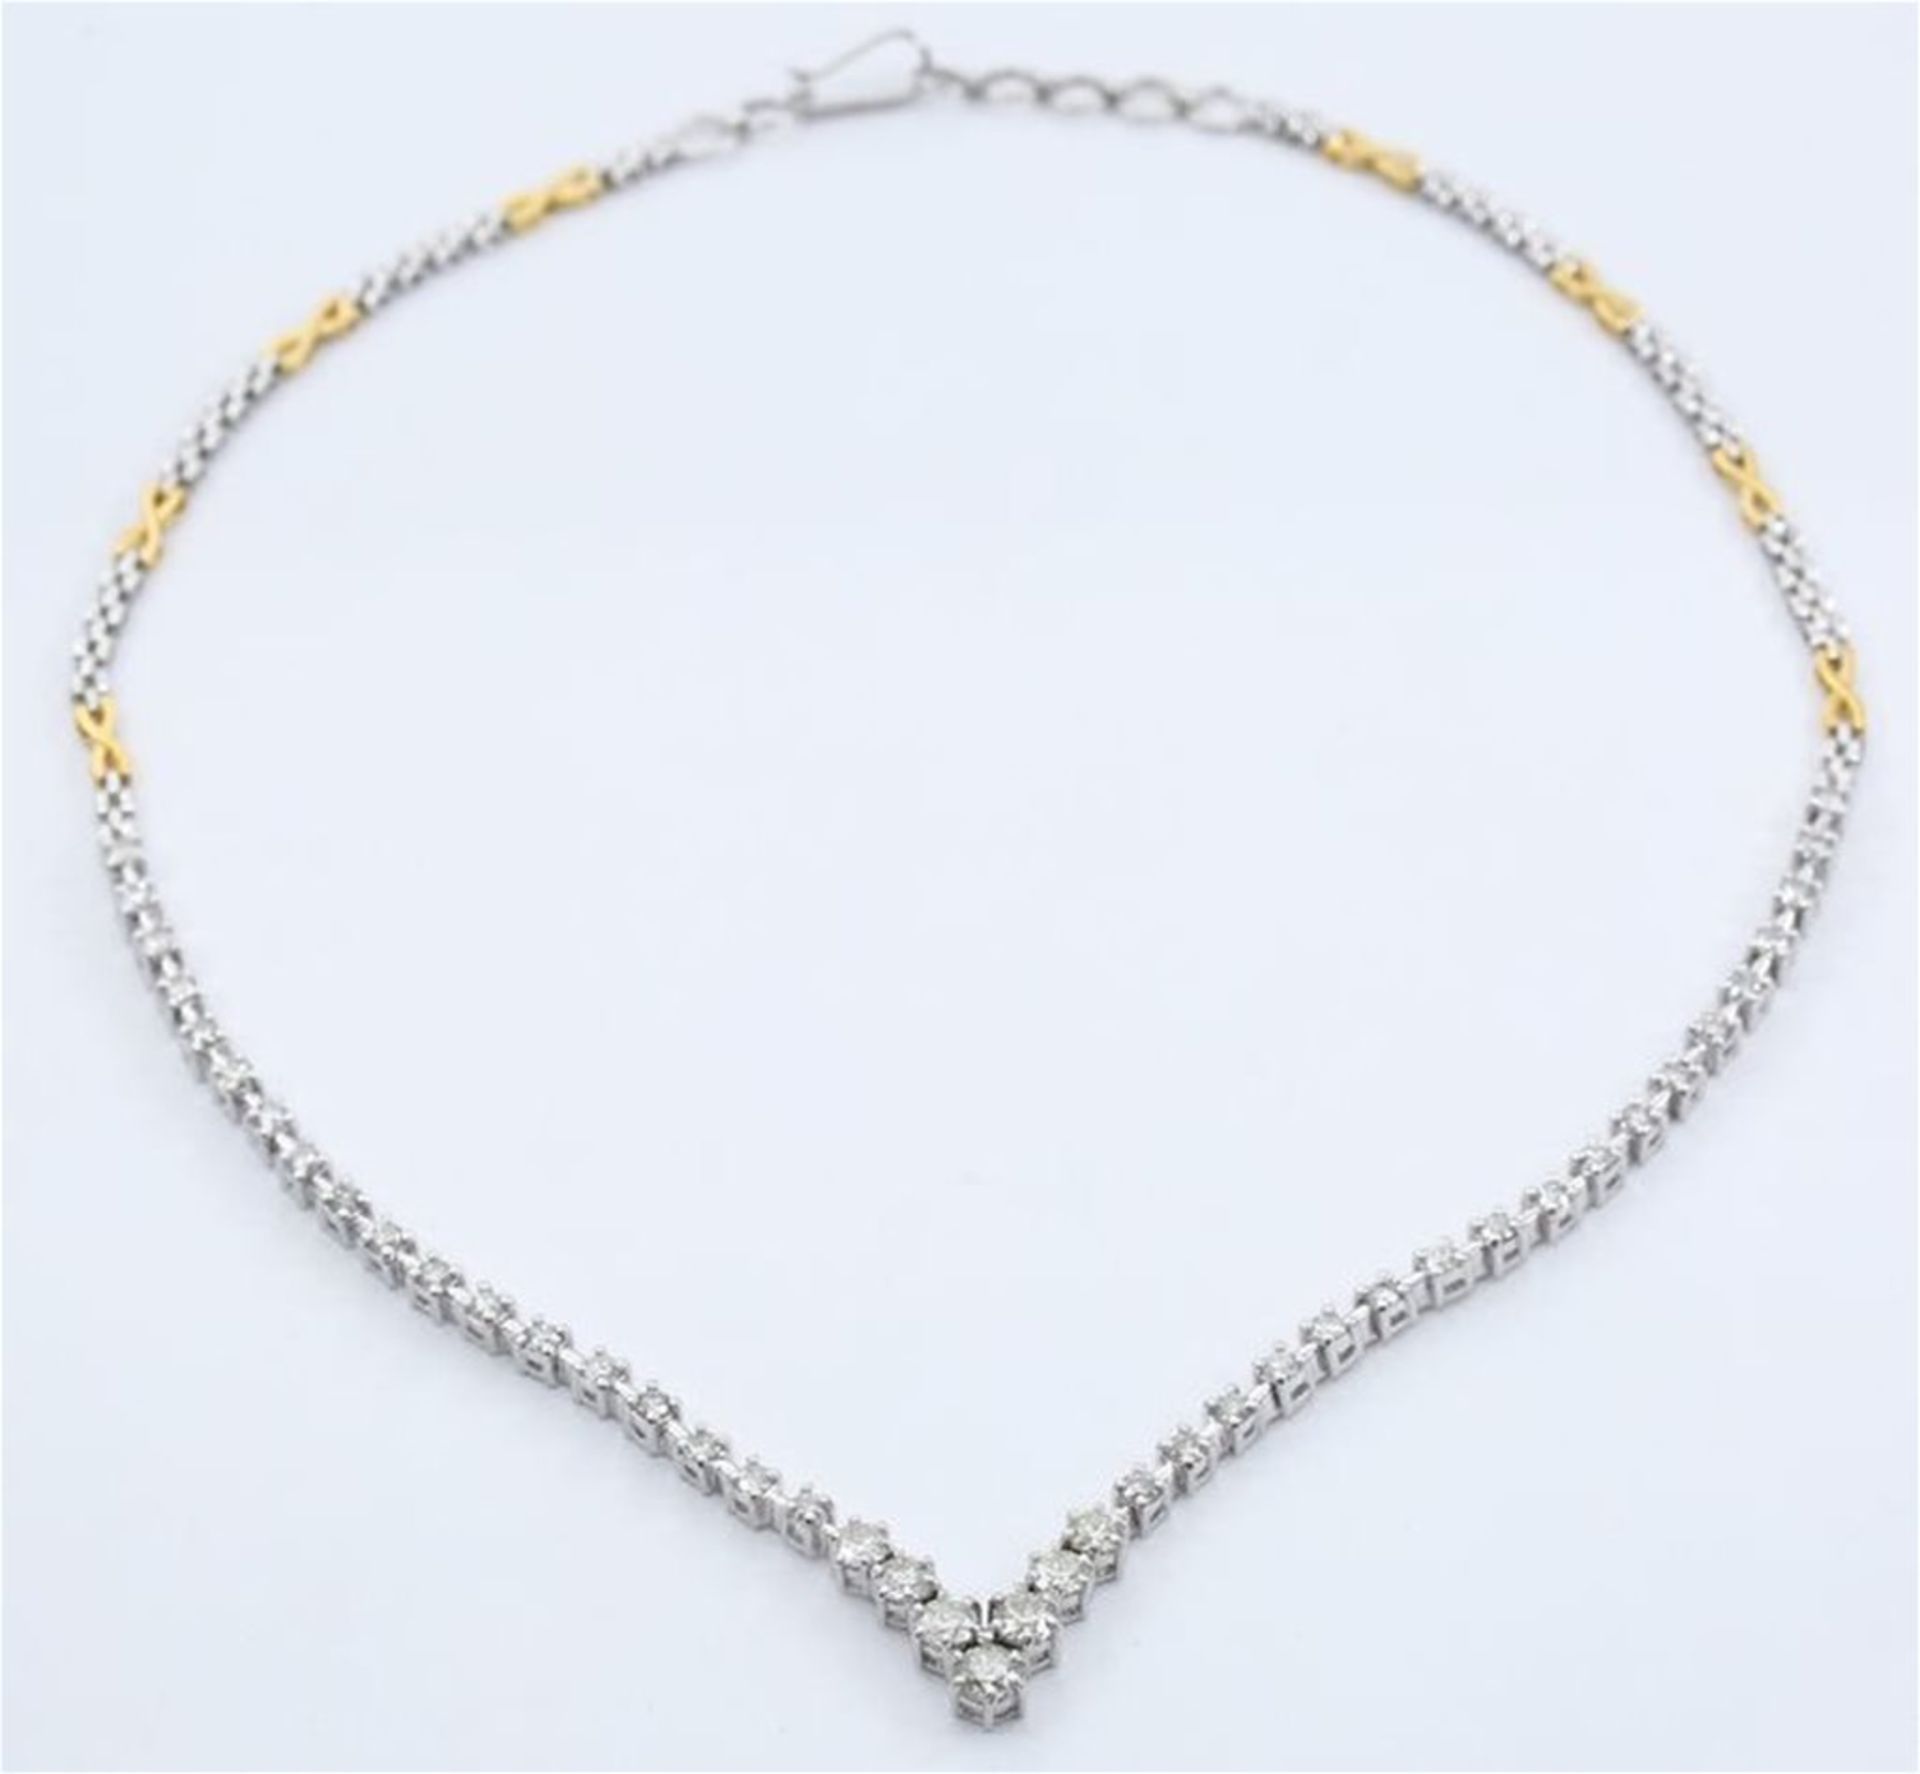 IGI Certified 14 K /585 stamped White and Yellow Gold Solitaire Diamond String Necklace - Image 2 of 10